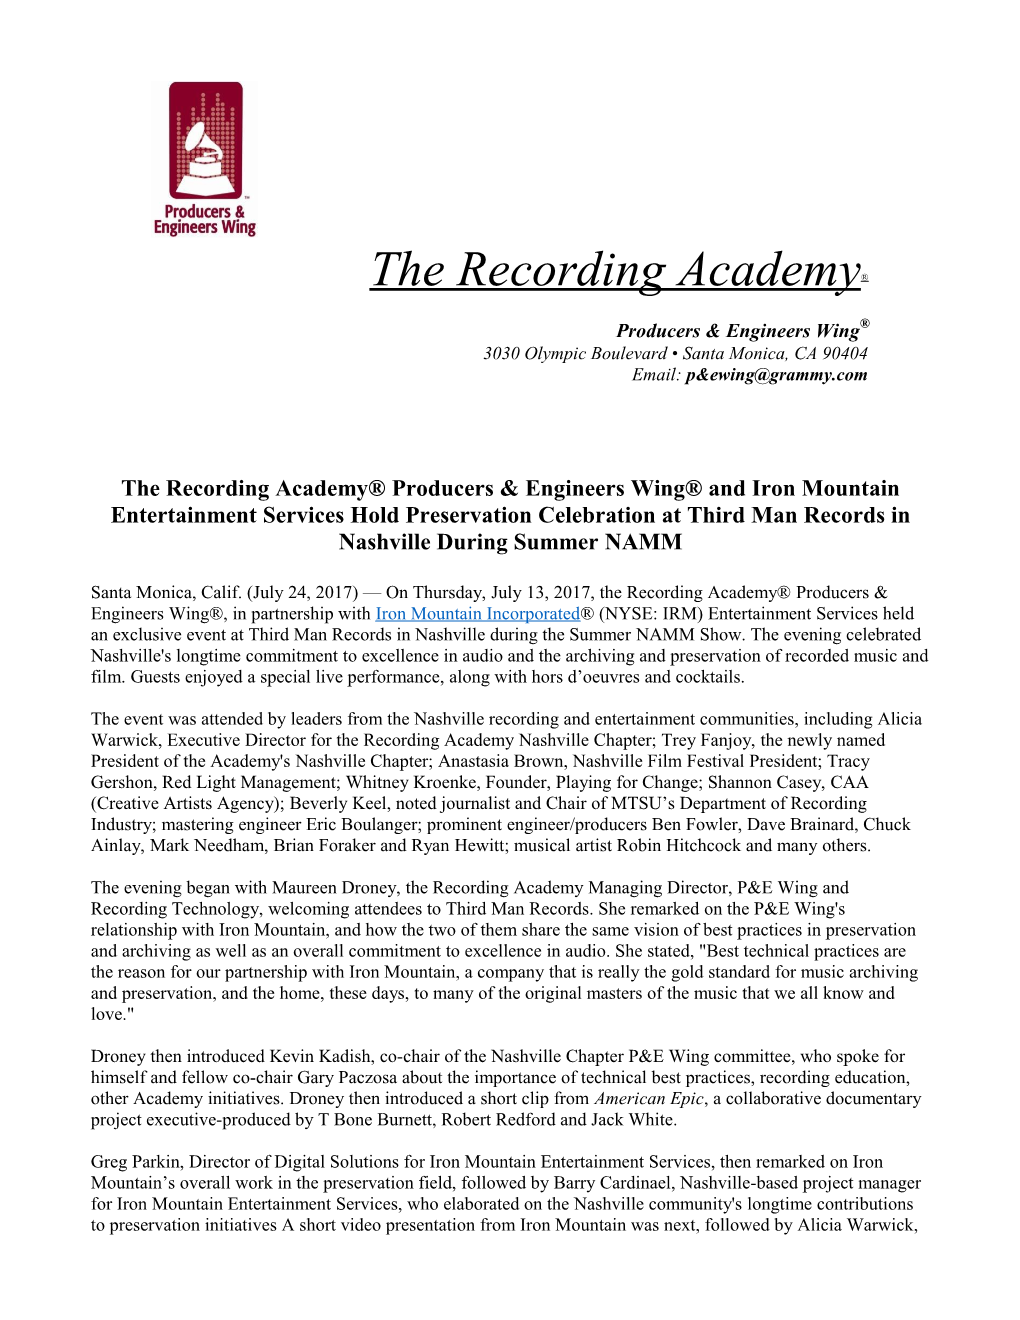 The Recording Academy Producers & Engineers Wing and Iron Mountain Entertainment Services